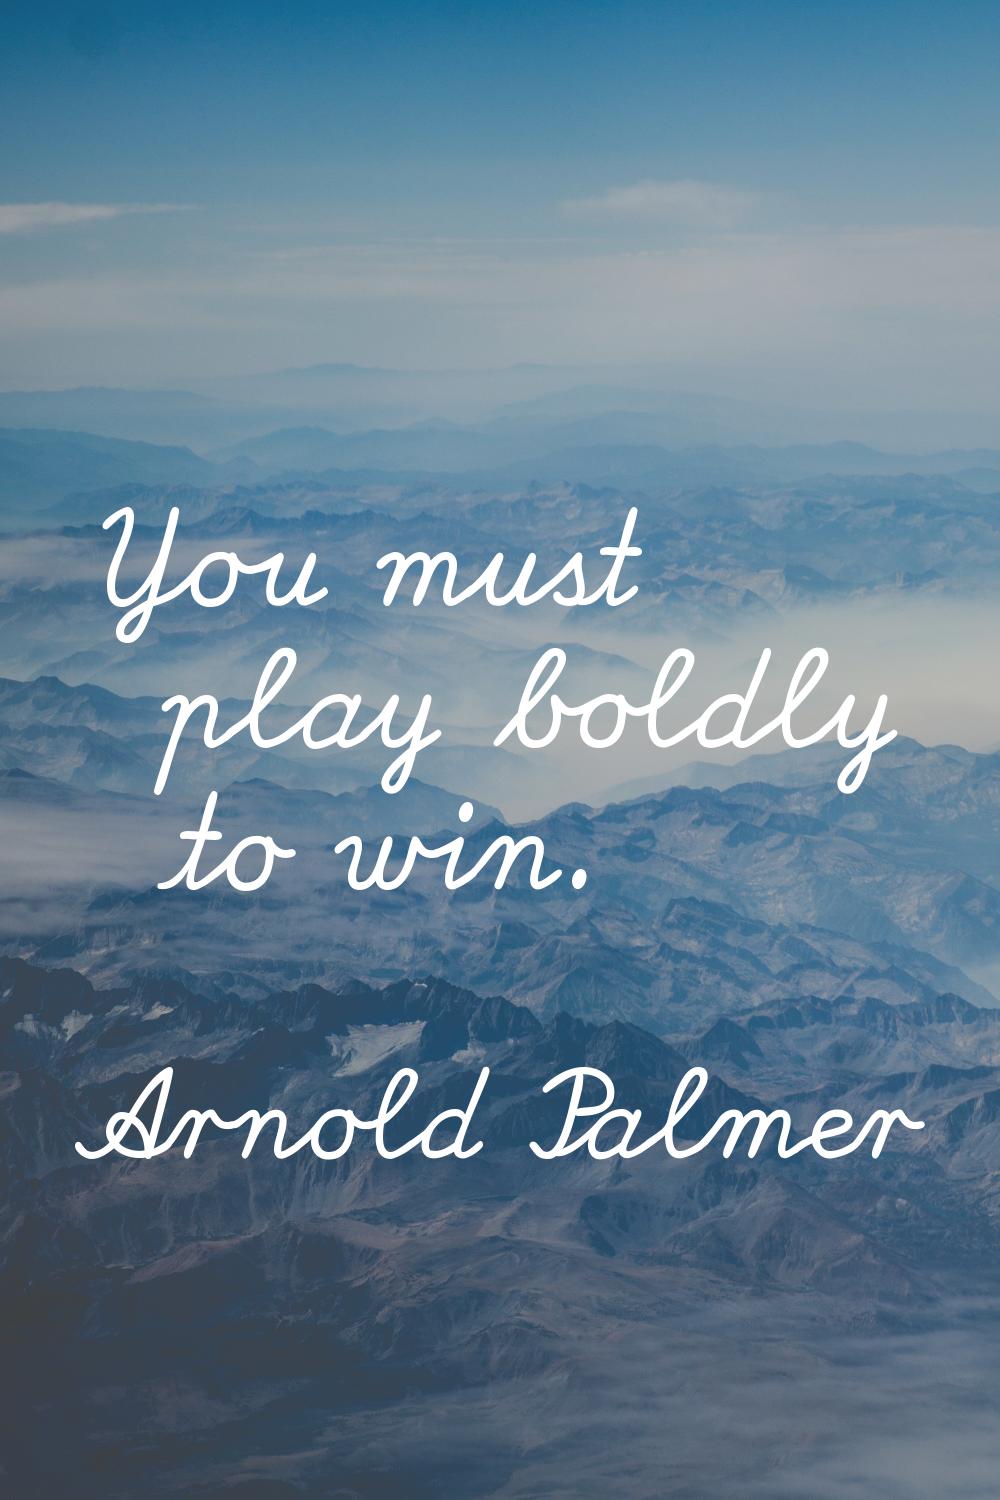 You must play boldly to win.